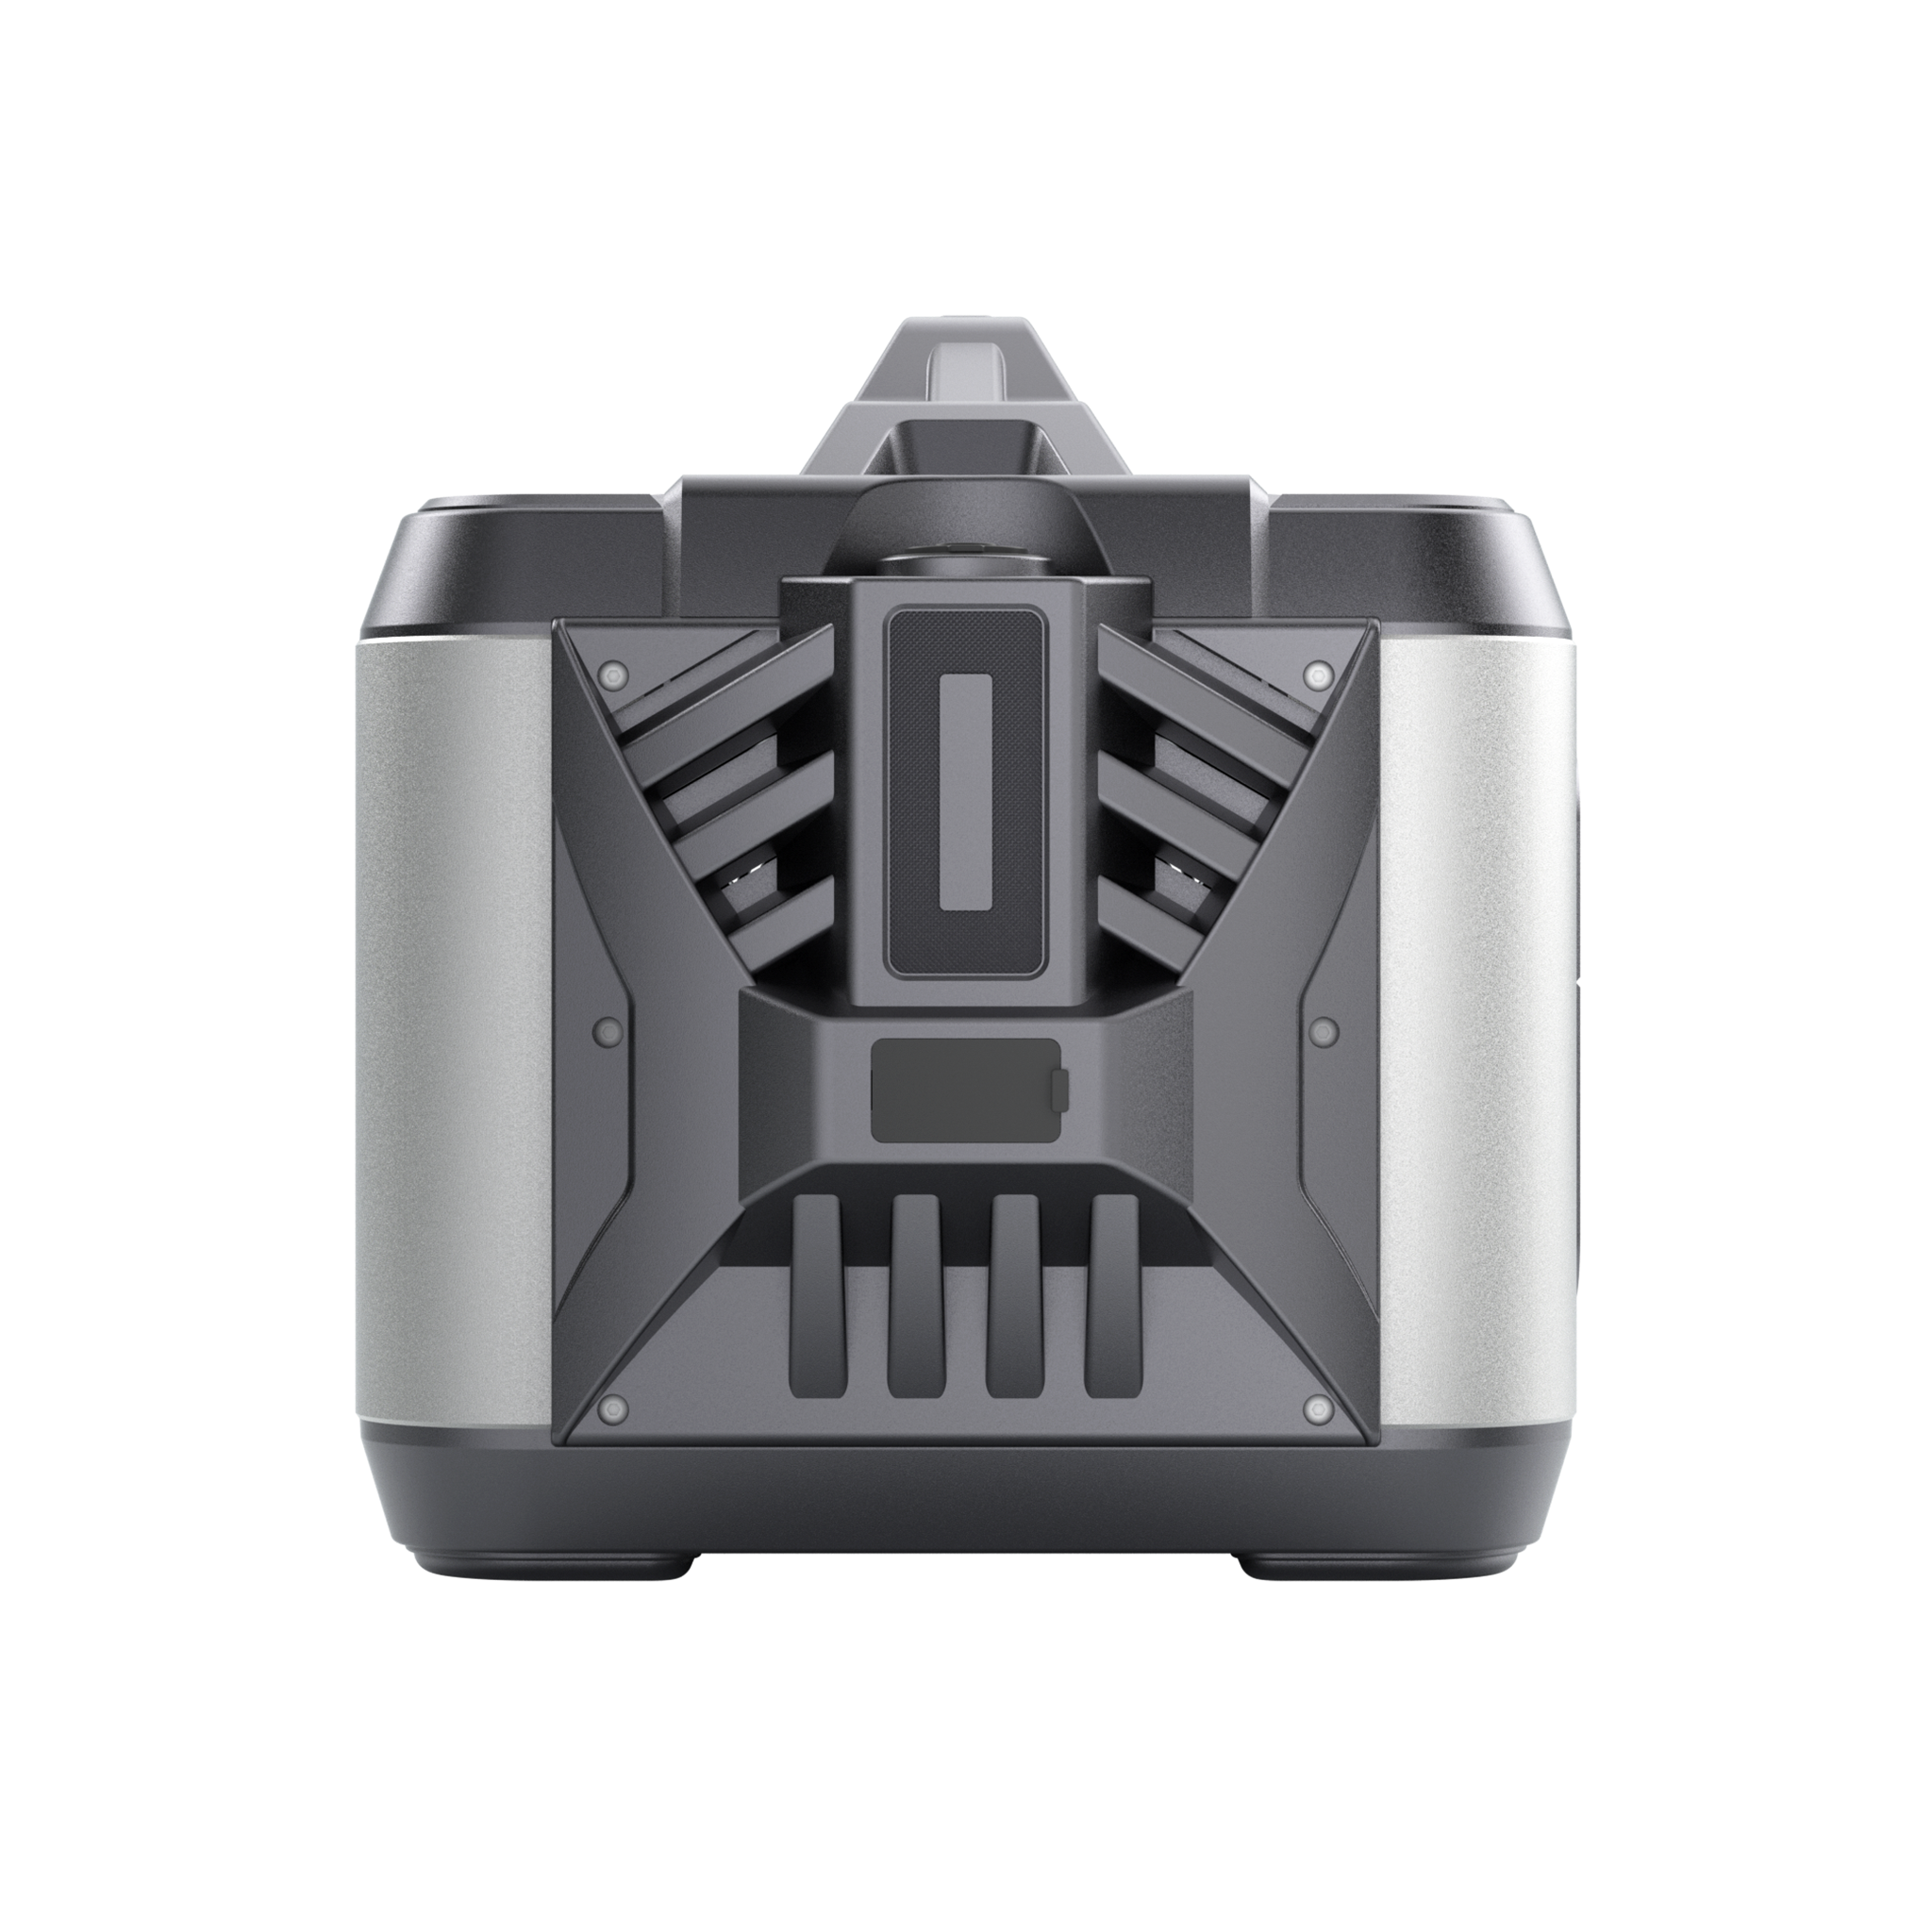 POWEREPUBLIC T2200 portable power station, 2200W 2240Wh, metallic gray aluminum-alloy body with aircraft wing design, a car charger, an Anderson port, and a handle.